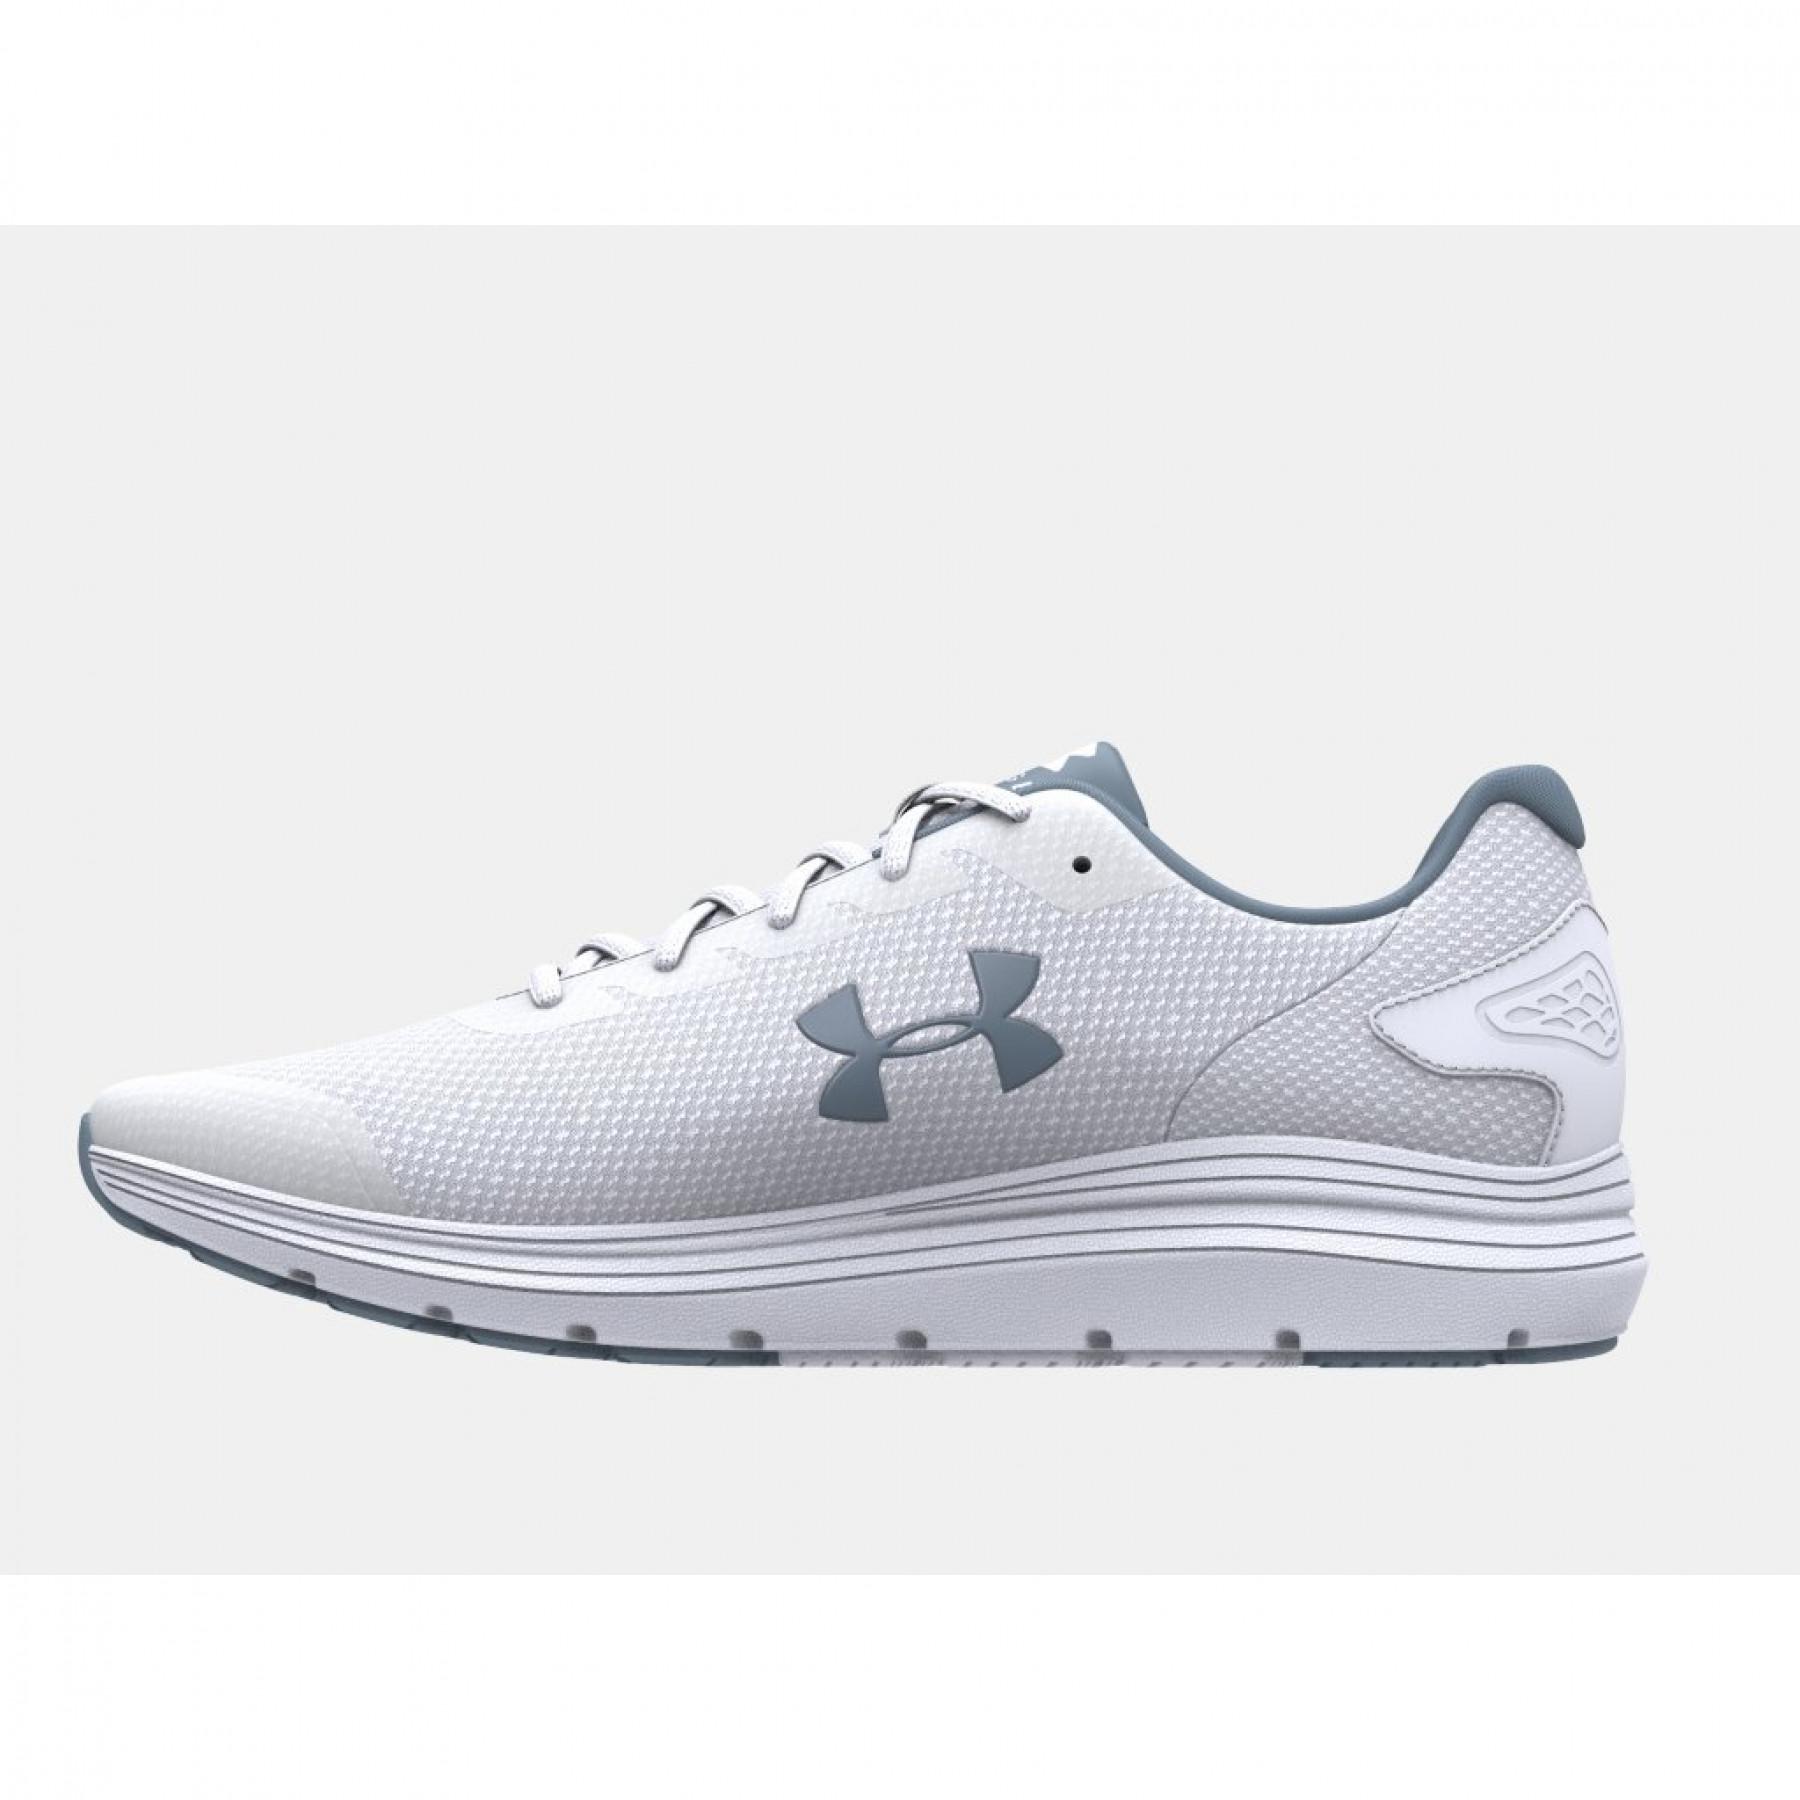 Under Armour WOMEN'S UA SURGE 2 RUNNING SHOES 3022605